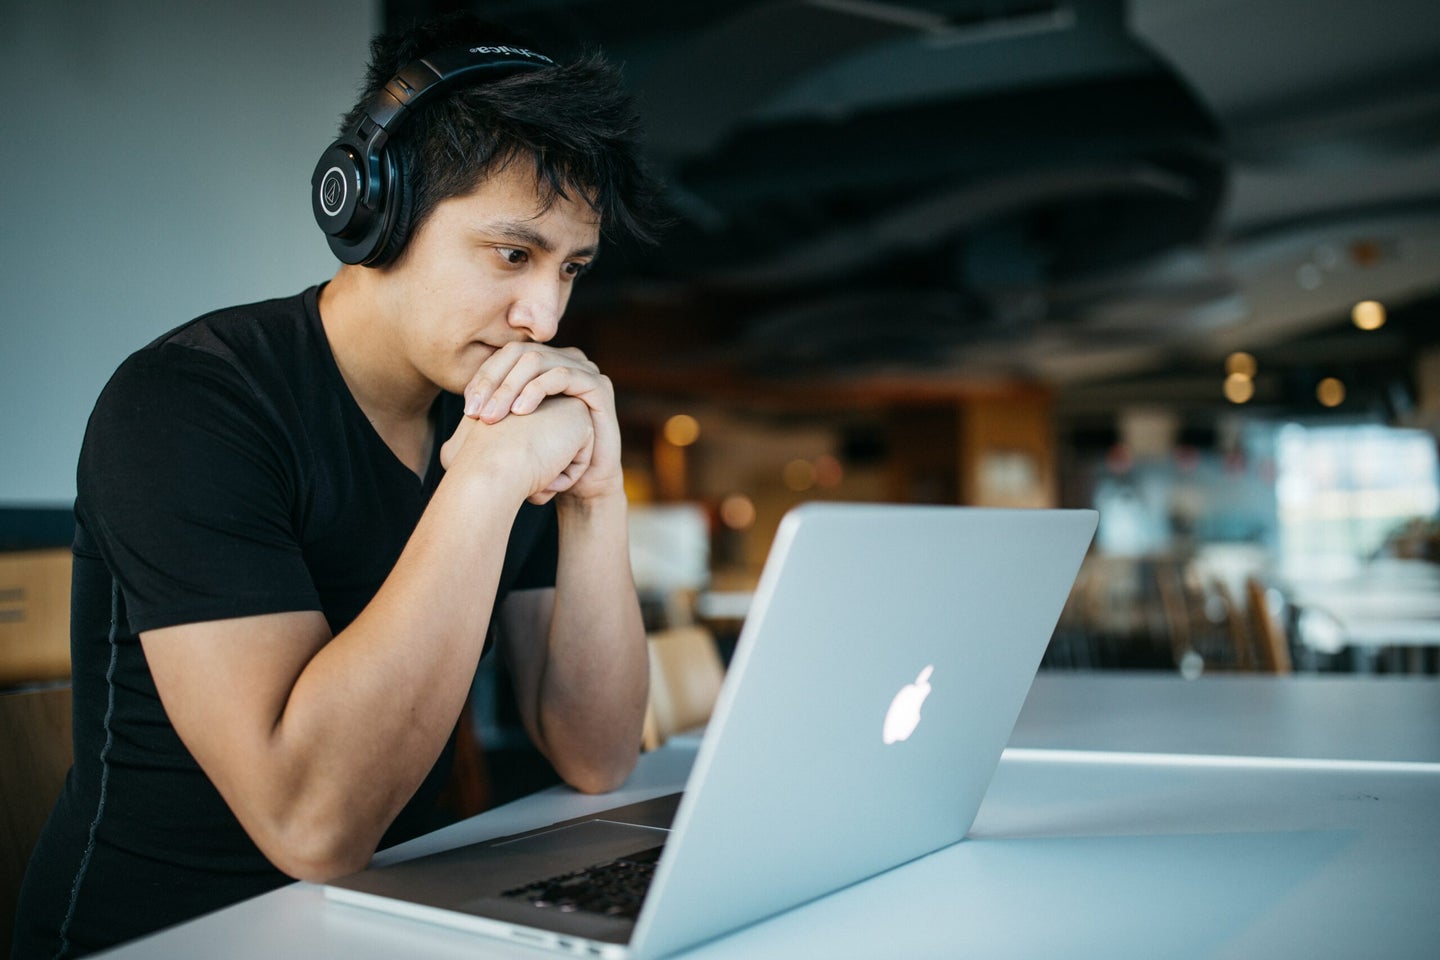 Worker sitting at Mac laptop with wireless headphones on